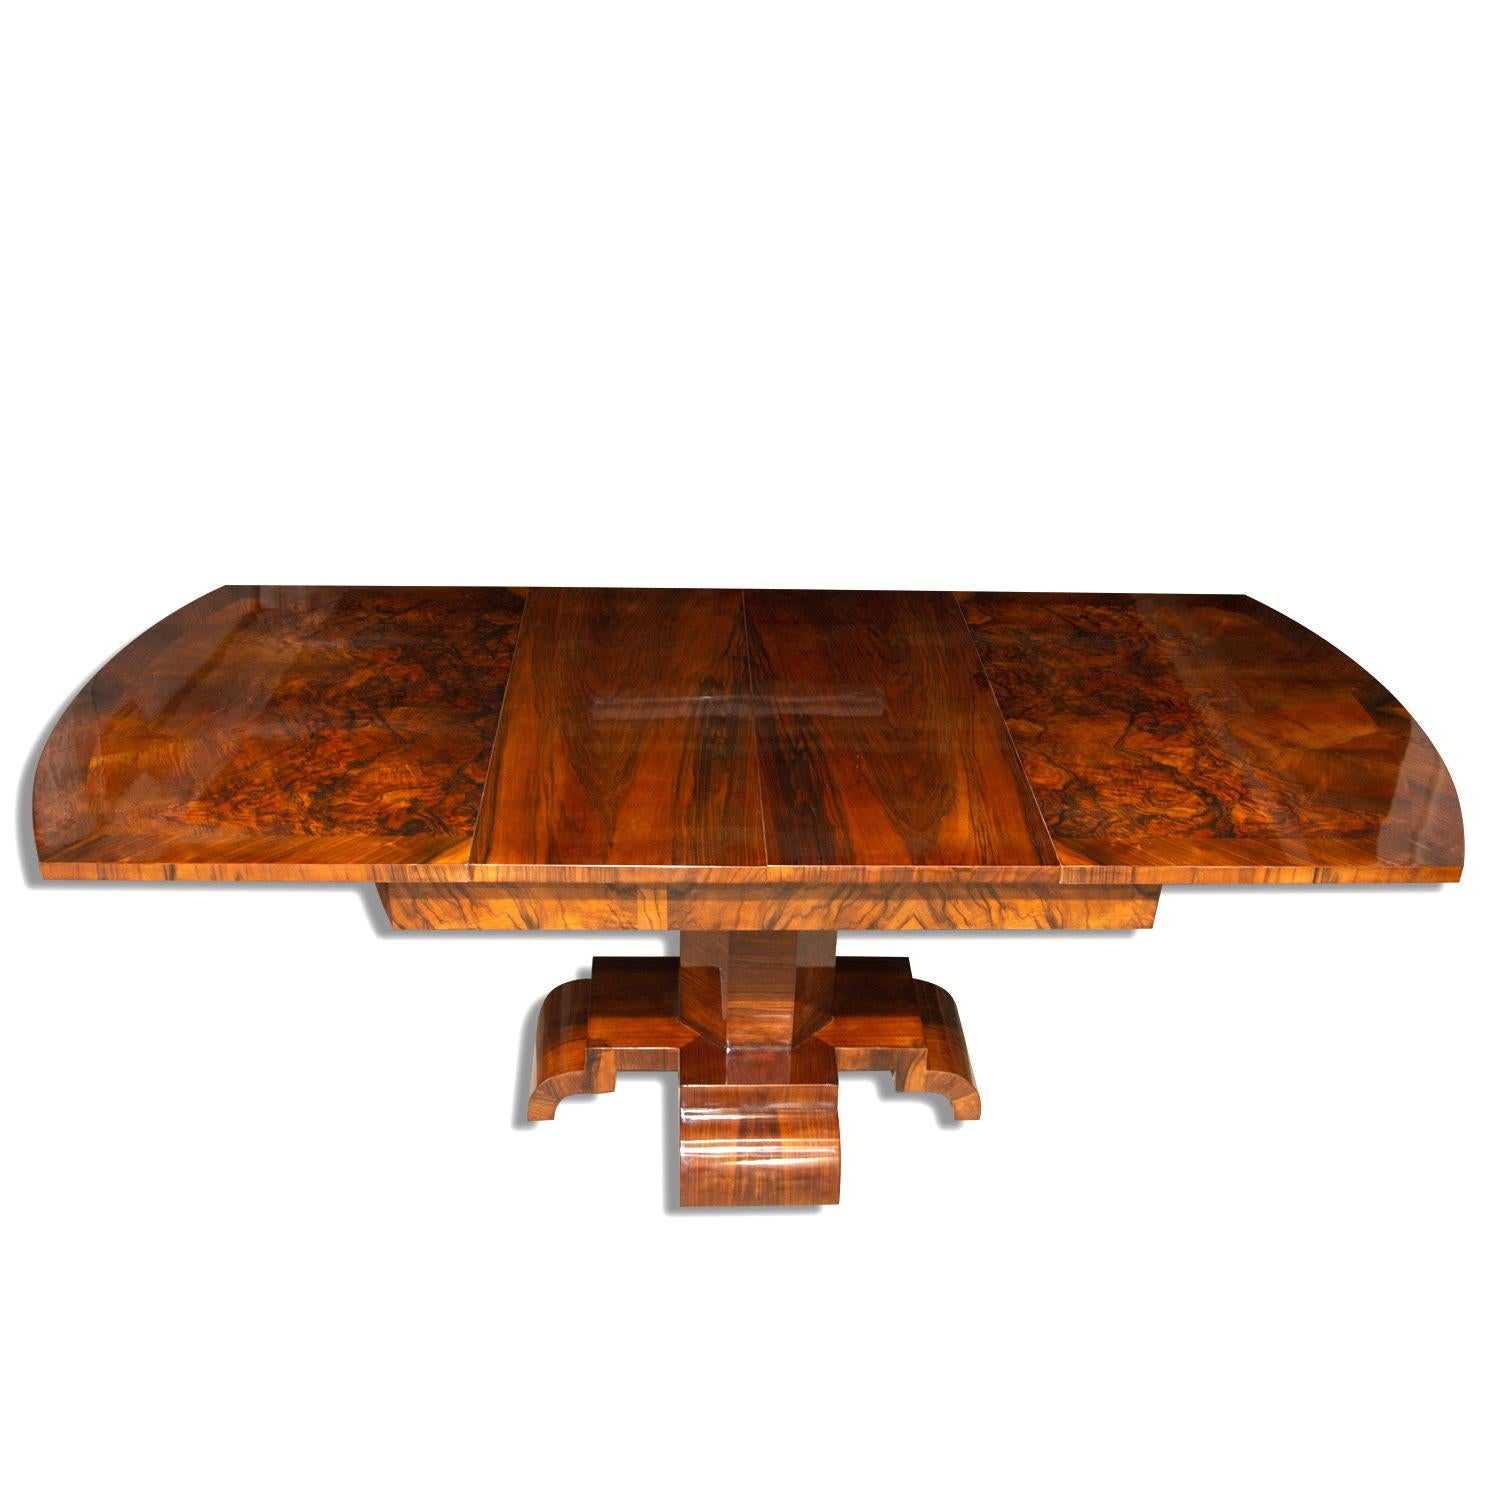 Wood Art Deco Adjustable Dining Table in Walnut Veneer from the 1930s